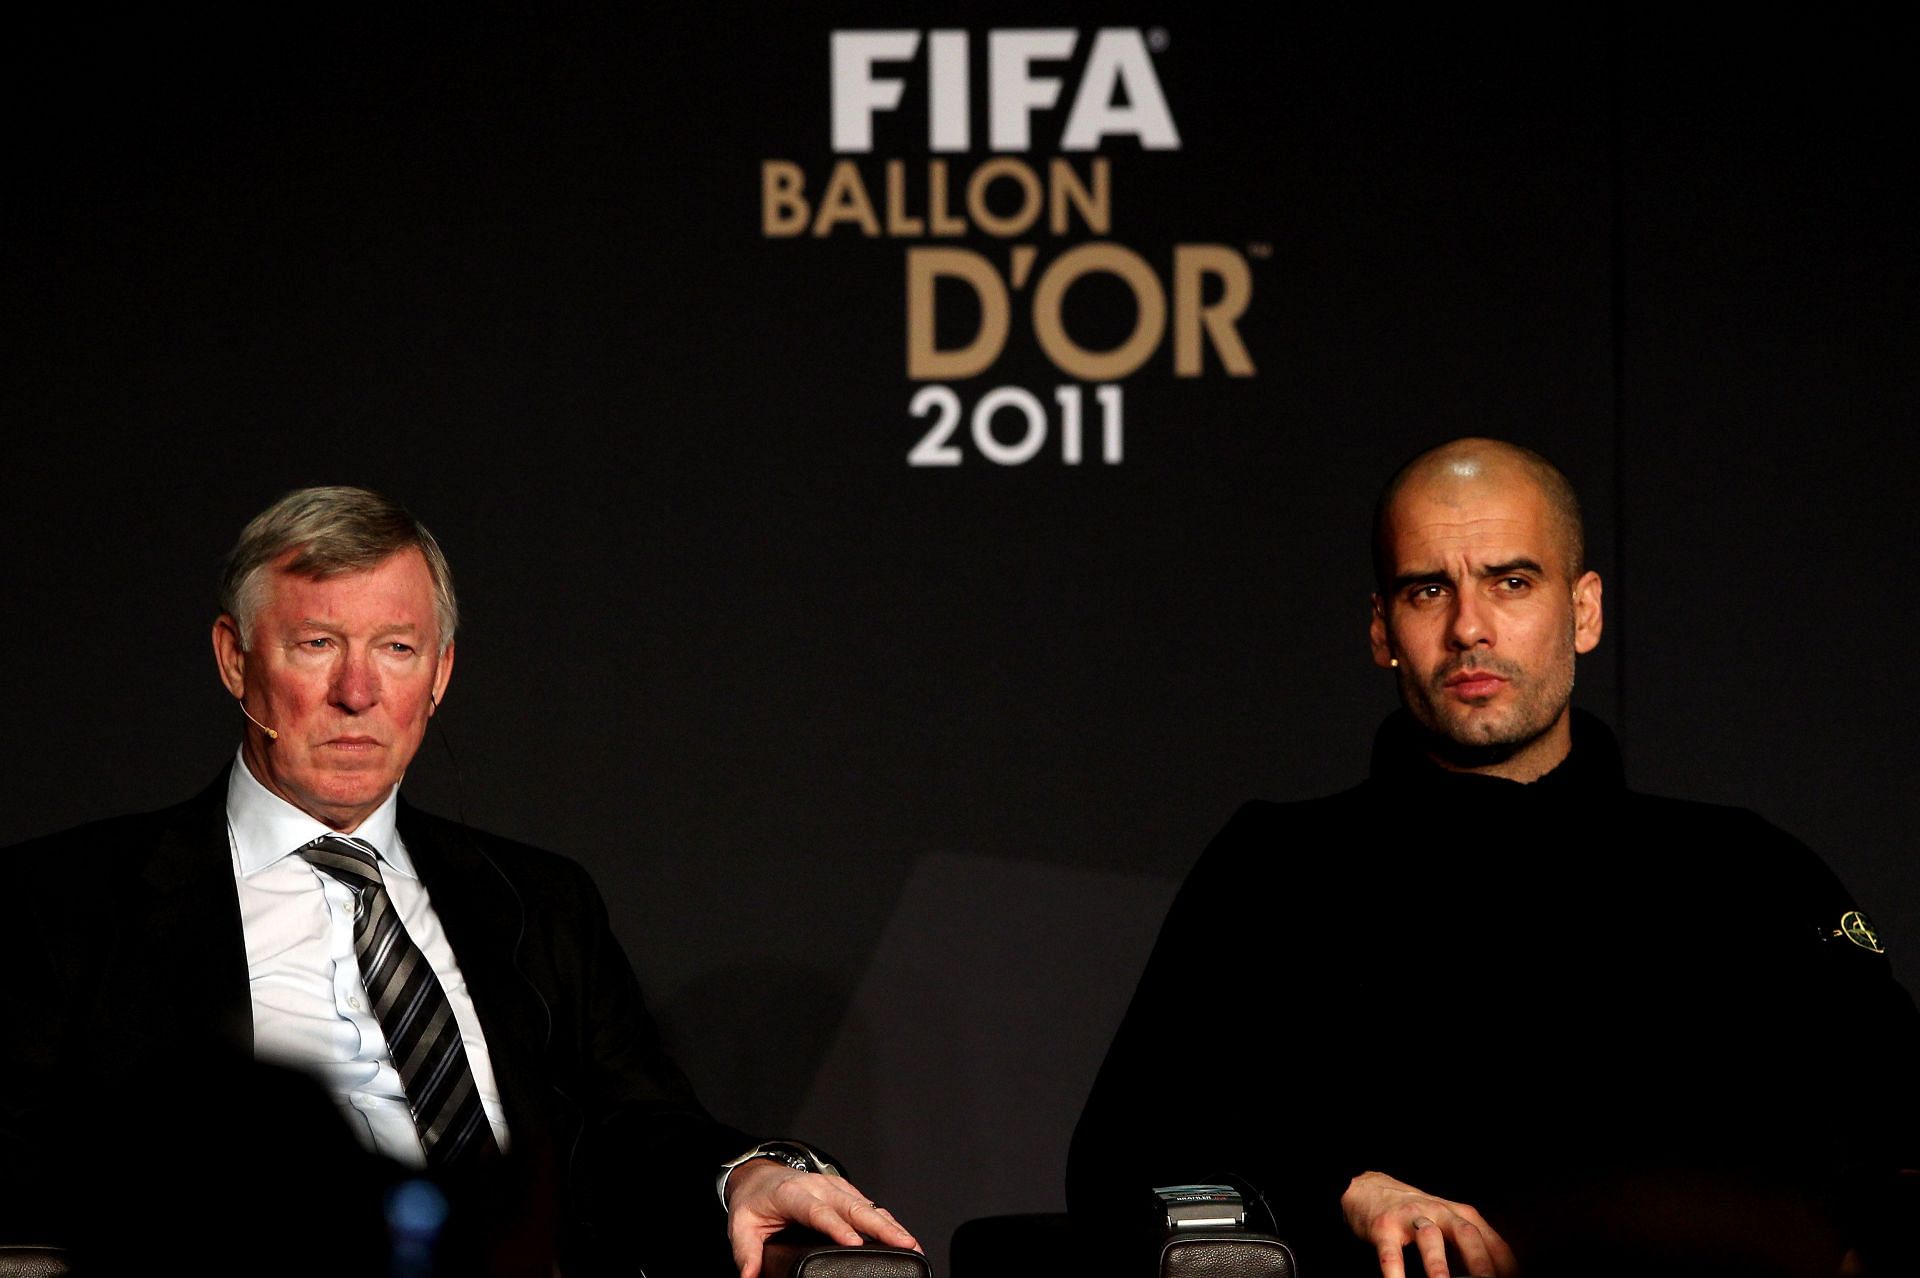 Sir Alex Ferguson (left) may have lined up Pep Guardiola for the Manchester United job.